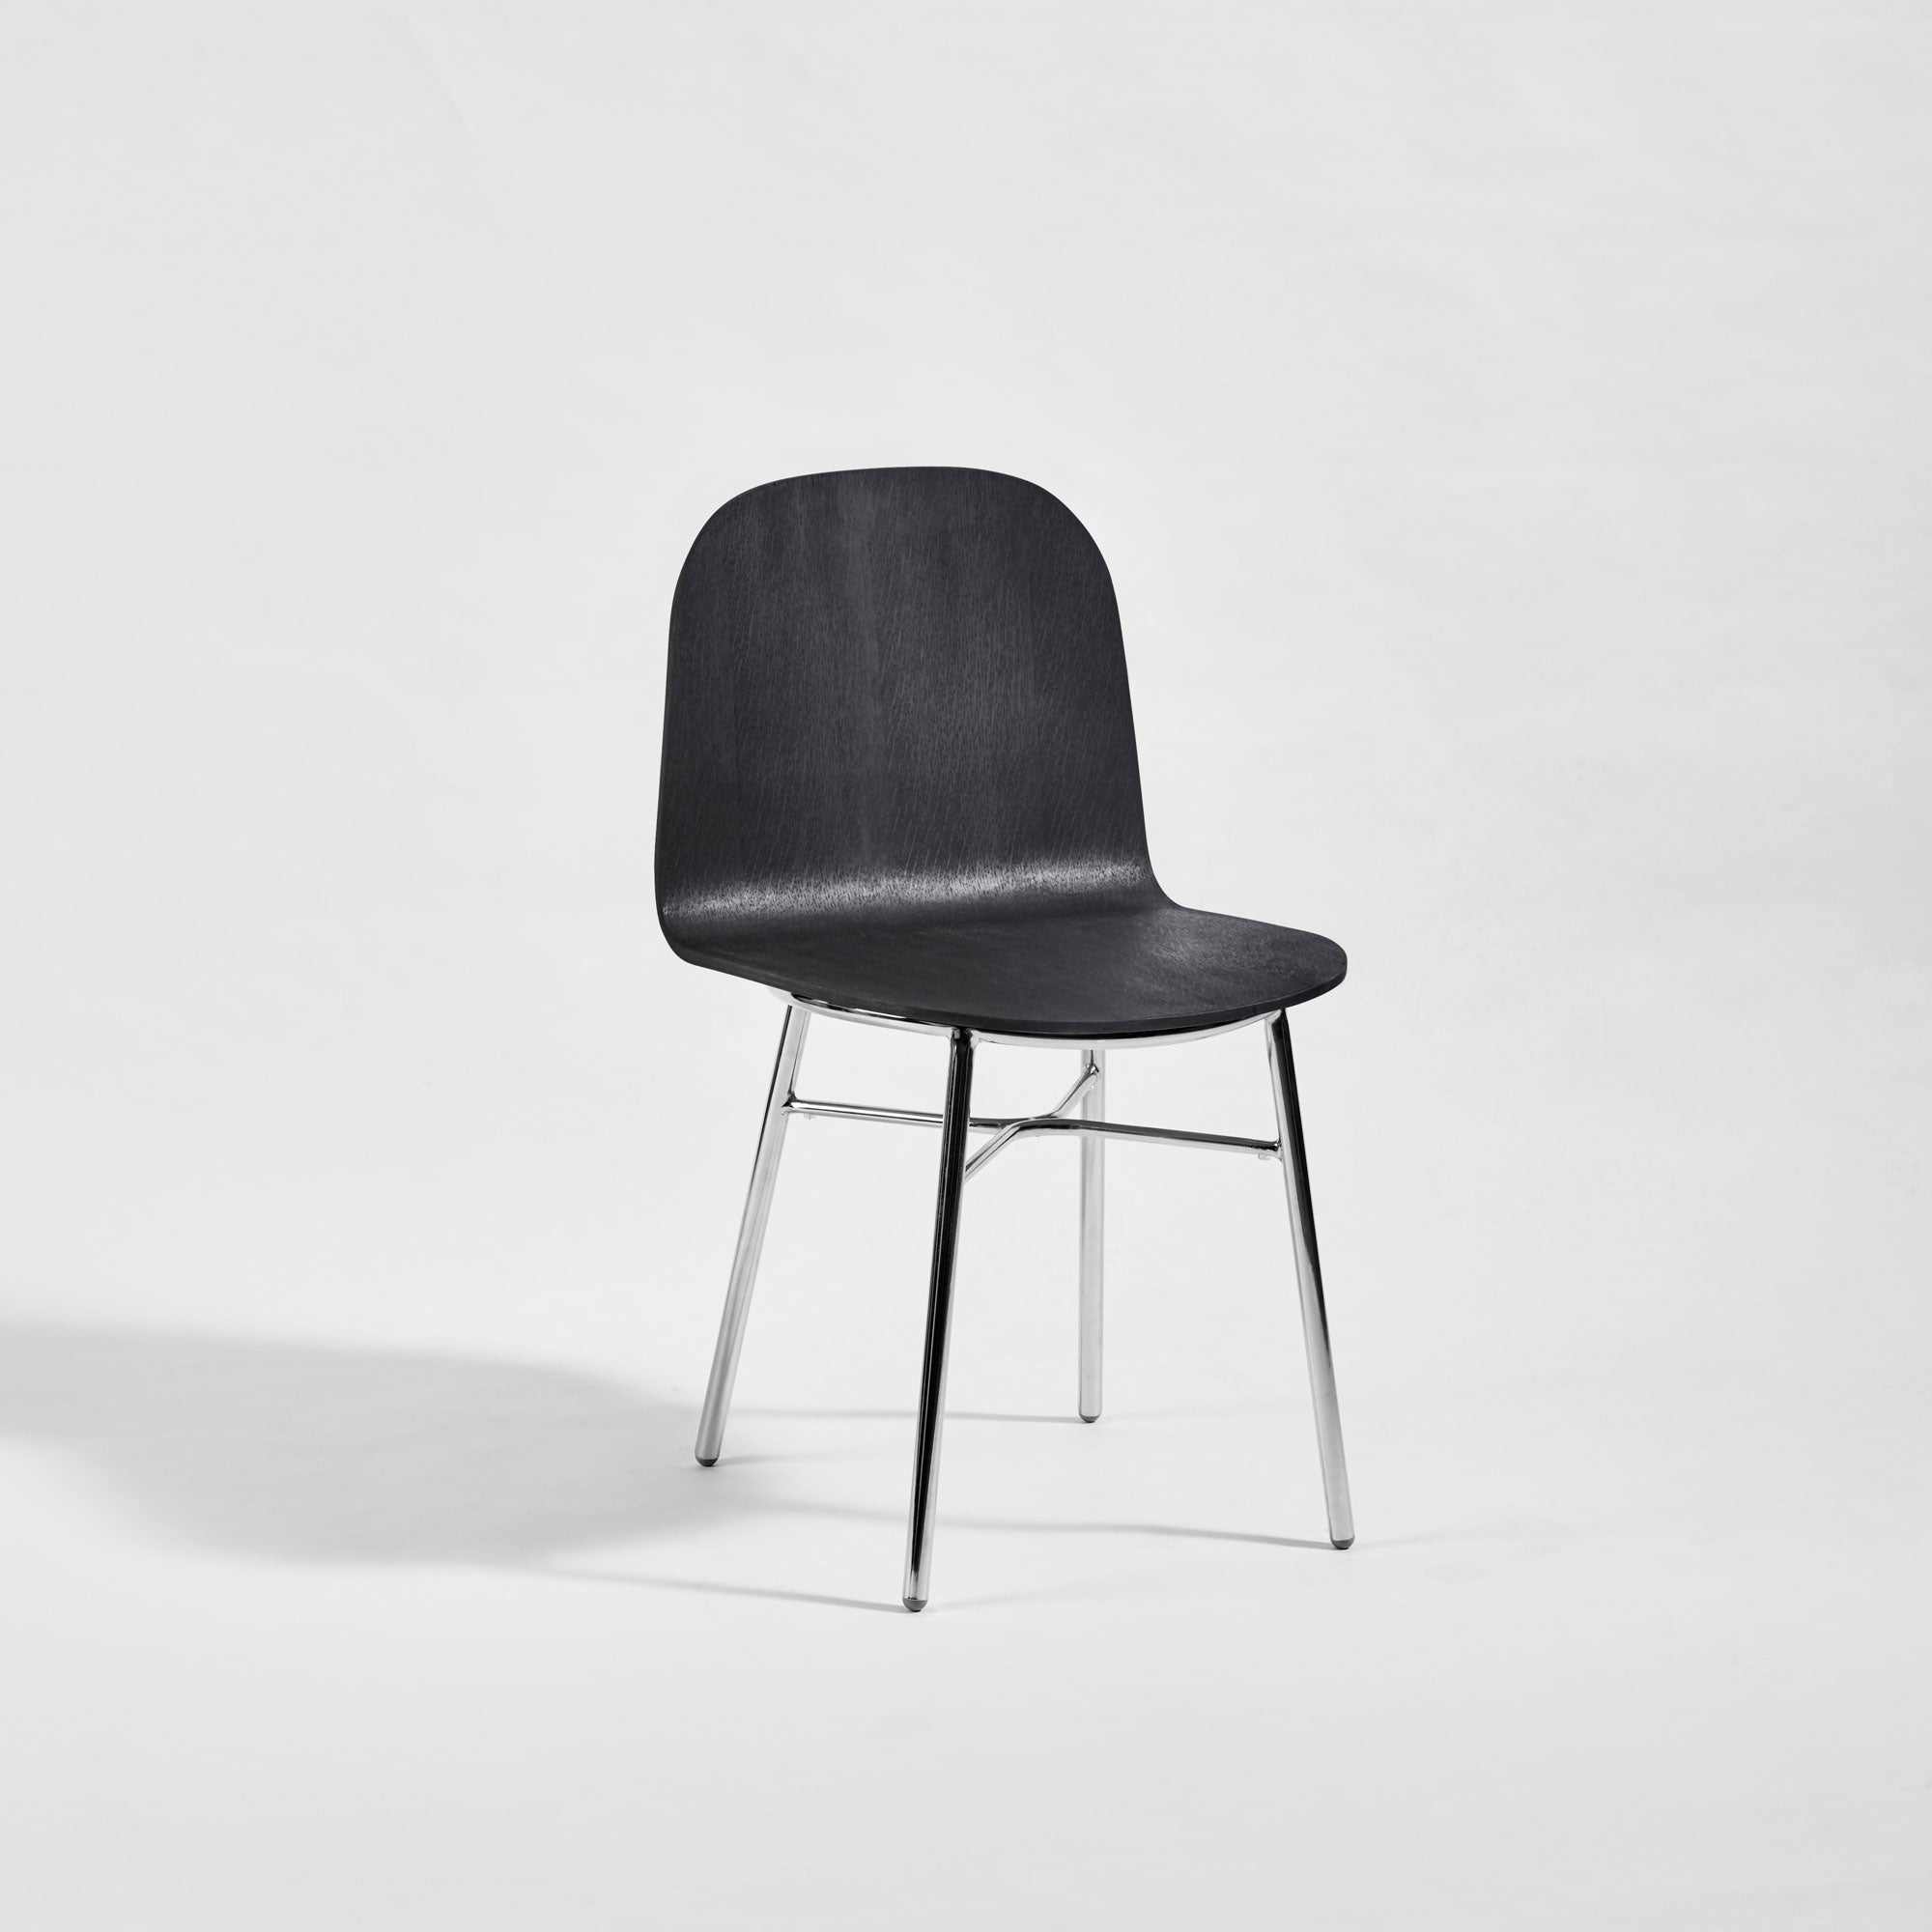 Potato Chair | Timber & Upholstered Dining Office Chair with Handle | GibsonKarlo | DesignByThem